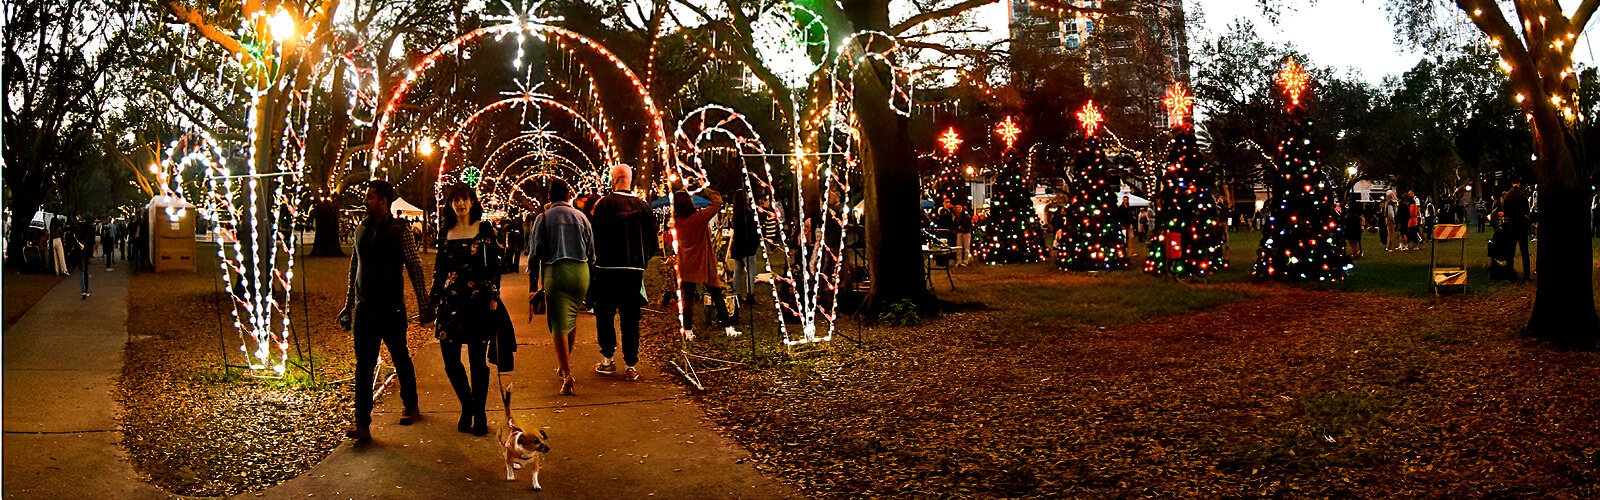 First Night goers walk through festive displays of lights and decorations to reach the various stations of entertainment and creative activities.